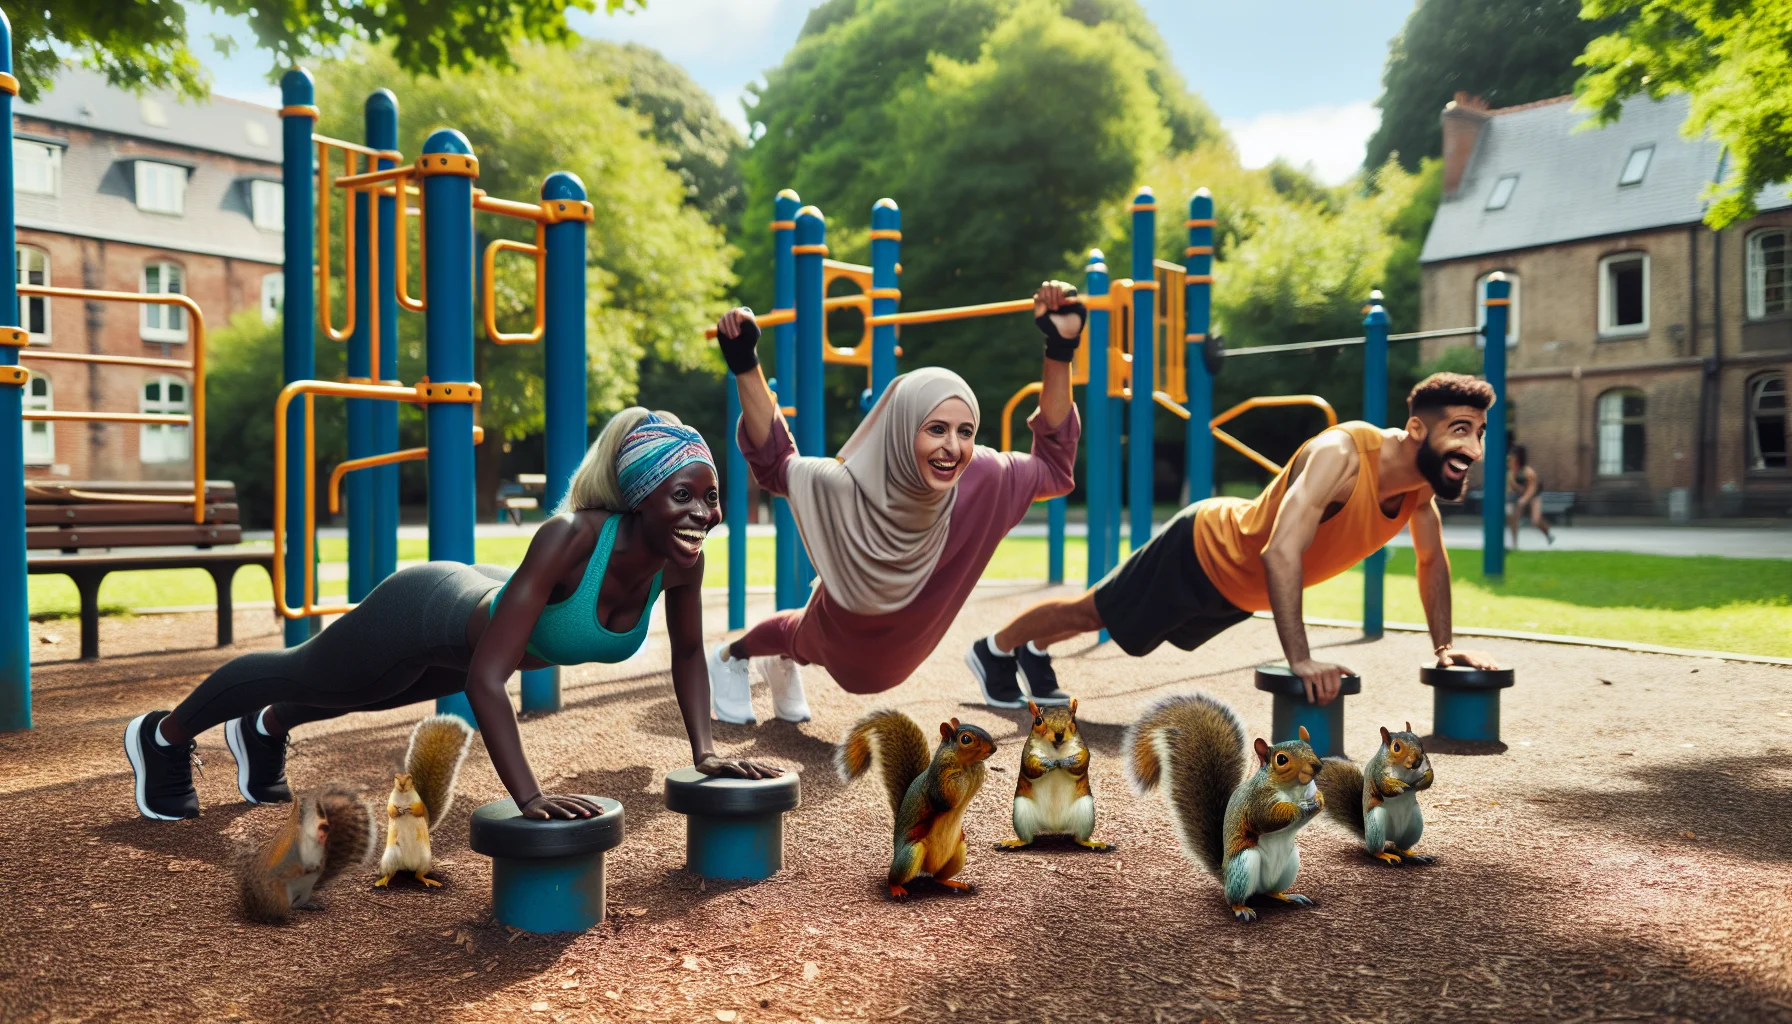 Imagine a humorous, vibrant scene taking place outdoors in a park filled with exercise equipment. There are three individuals of mixed descent: a Black female, Hispanic male, and Middle-Eastern female, all of them engaging in a calisthenics push day. They're performing a variety of exercises such as push-ups and dips while laughing and cheering each other on. Suddenly, a group of squirrels decides to join in on the fun: they mimic the individuals, attempting their own little push-ups and dips with a comical twist. Their antics bring a lot of laughter to the scene and inspire passers-by to join the workout.